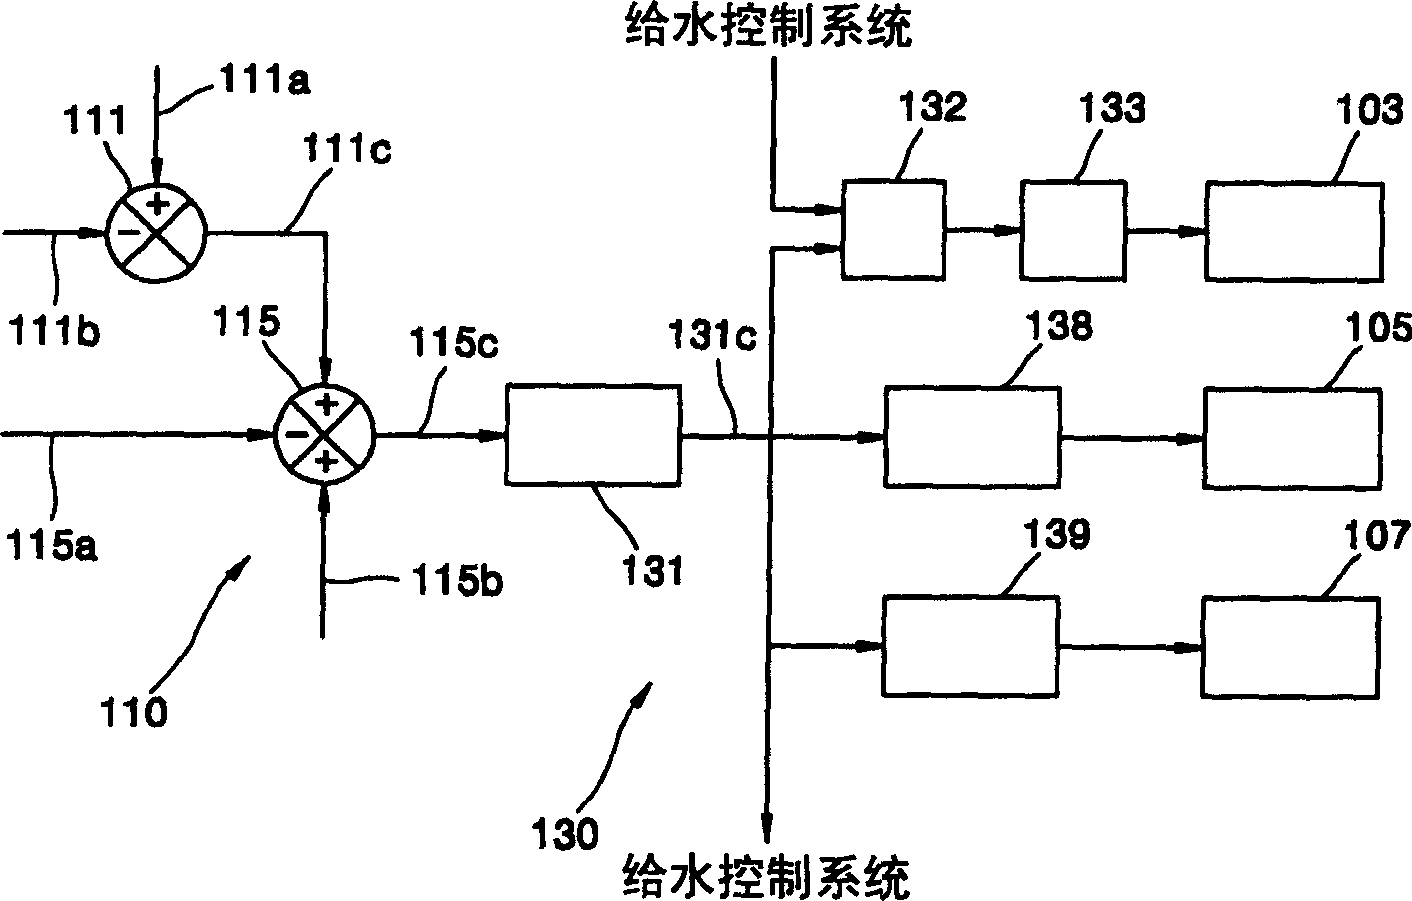 Water supply control system and control method considering pressure drop of water supply control valve in nuclear power station